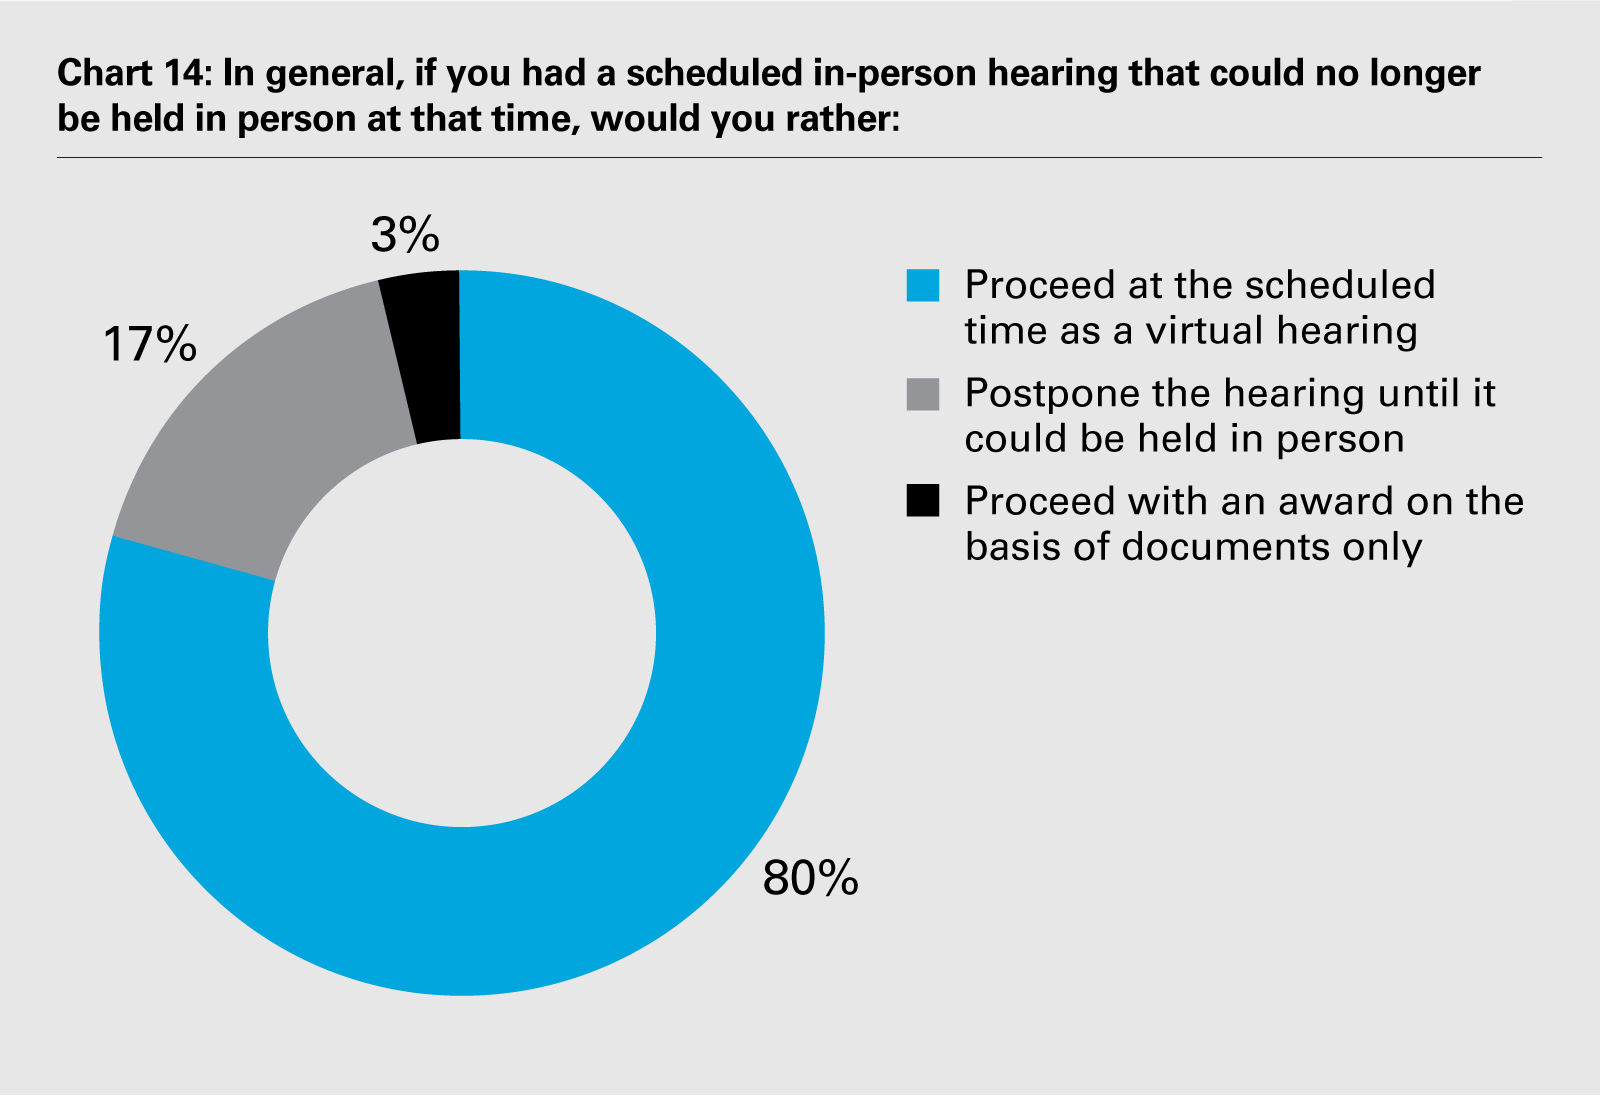 Chart 14: In general, if you had a scheduled in-person hearing that could no longer be held in person at that time, would you rather: (PDF)